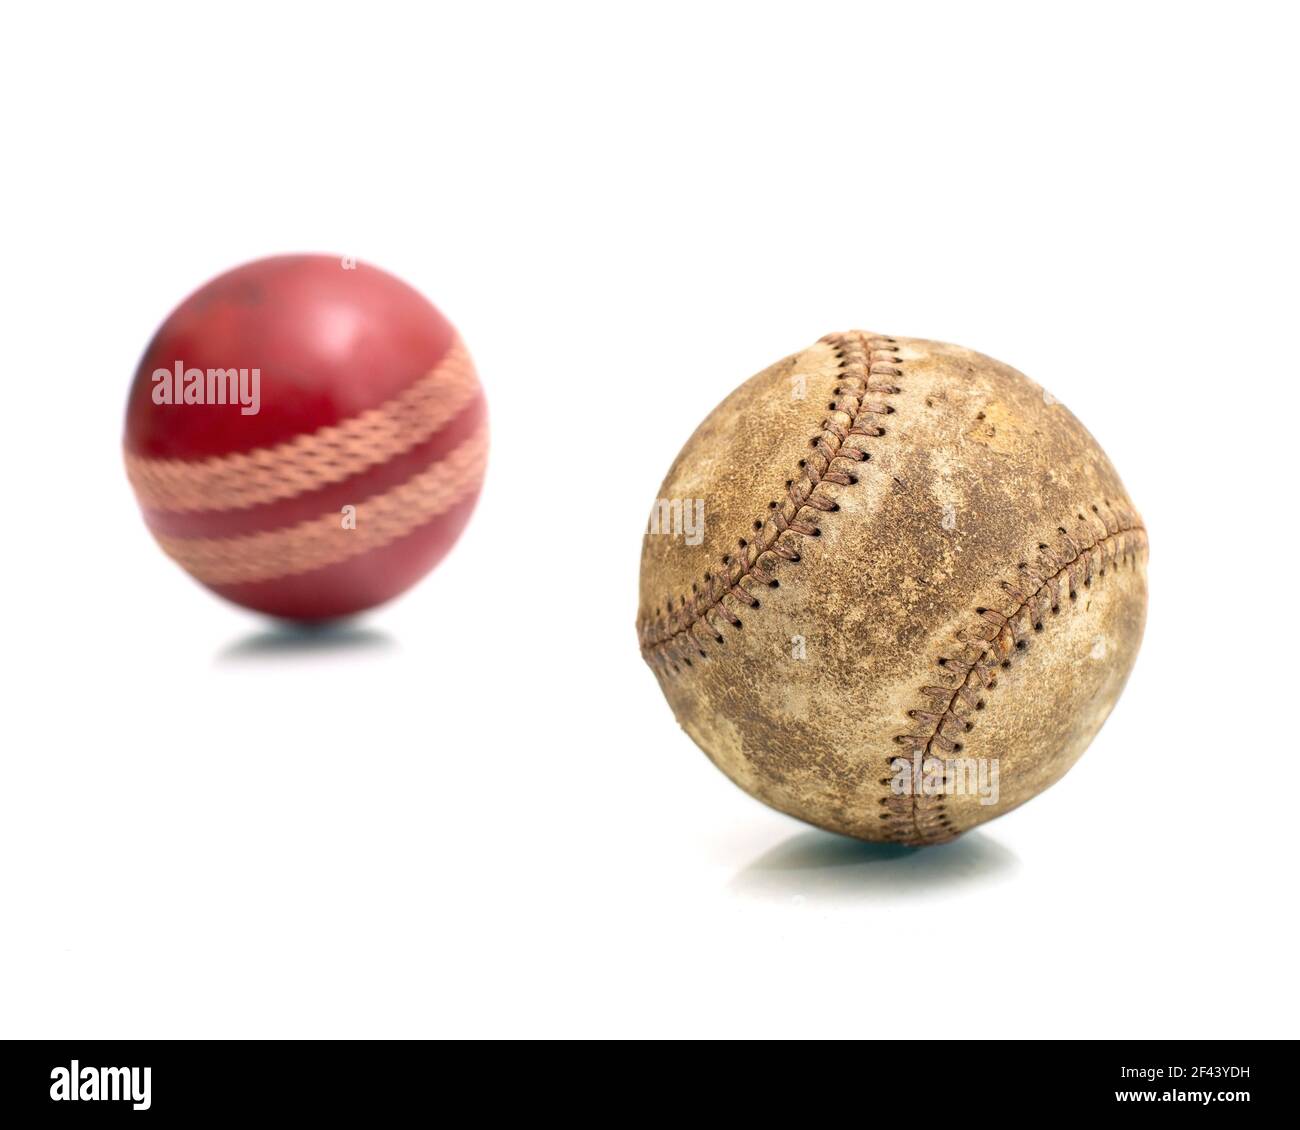 Vintage baseball and Cricket stress ball isolated on a white background. Stock Photo